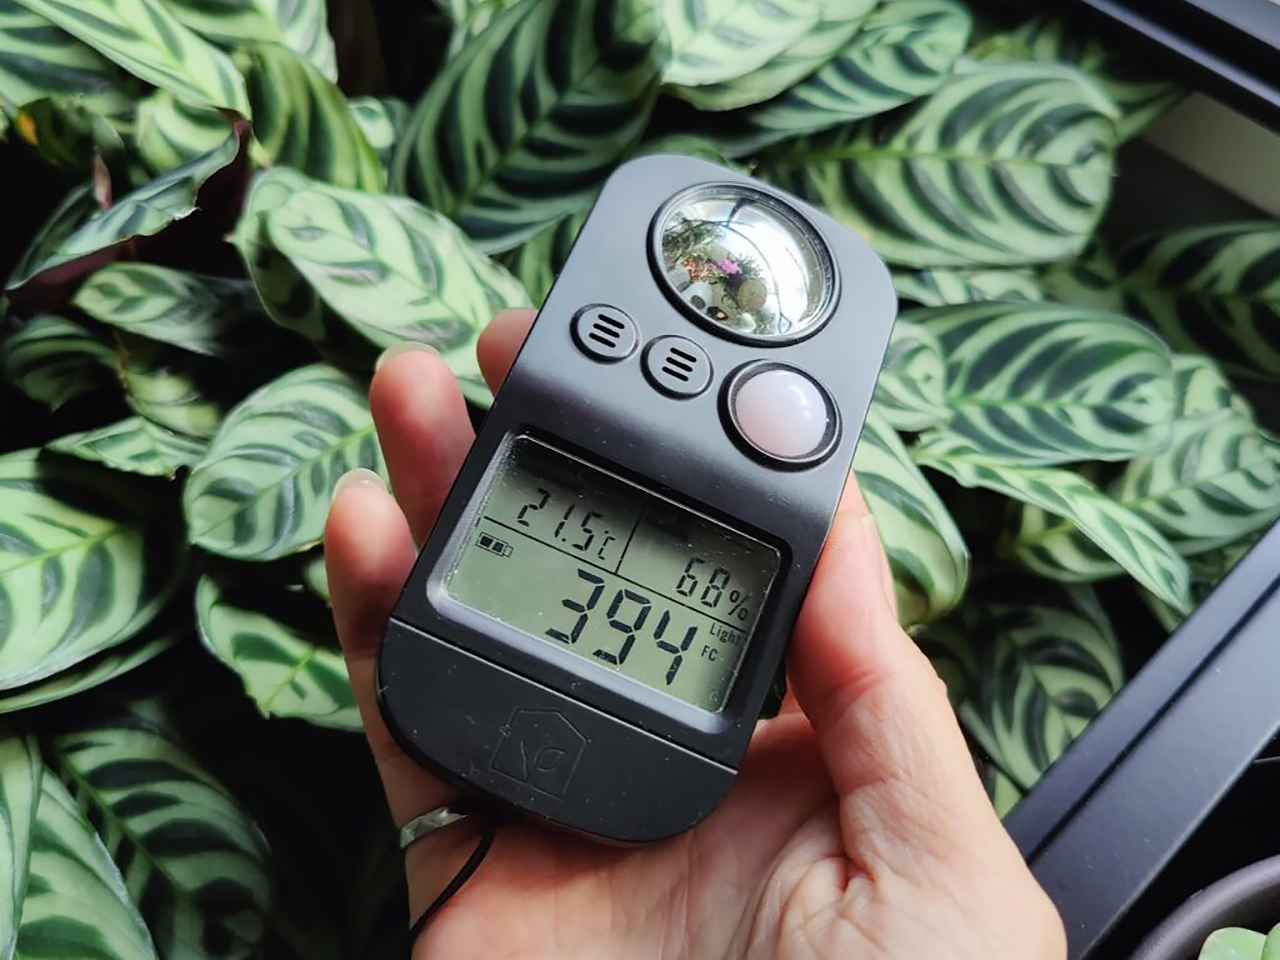 1280x960px-measuring-light-levels-for-growing-plants-vWA24